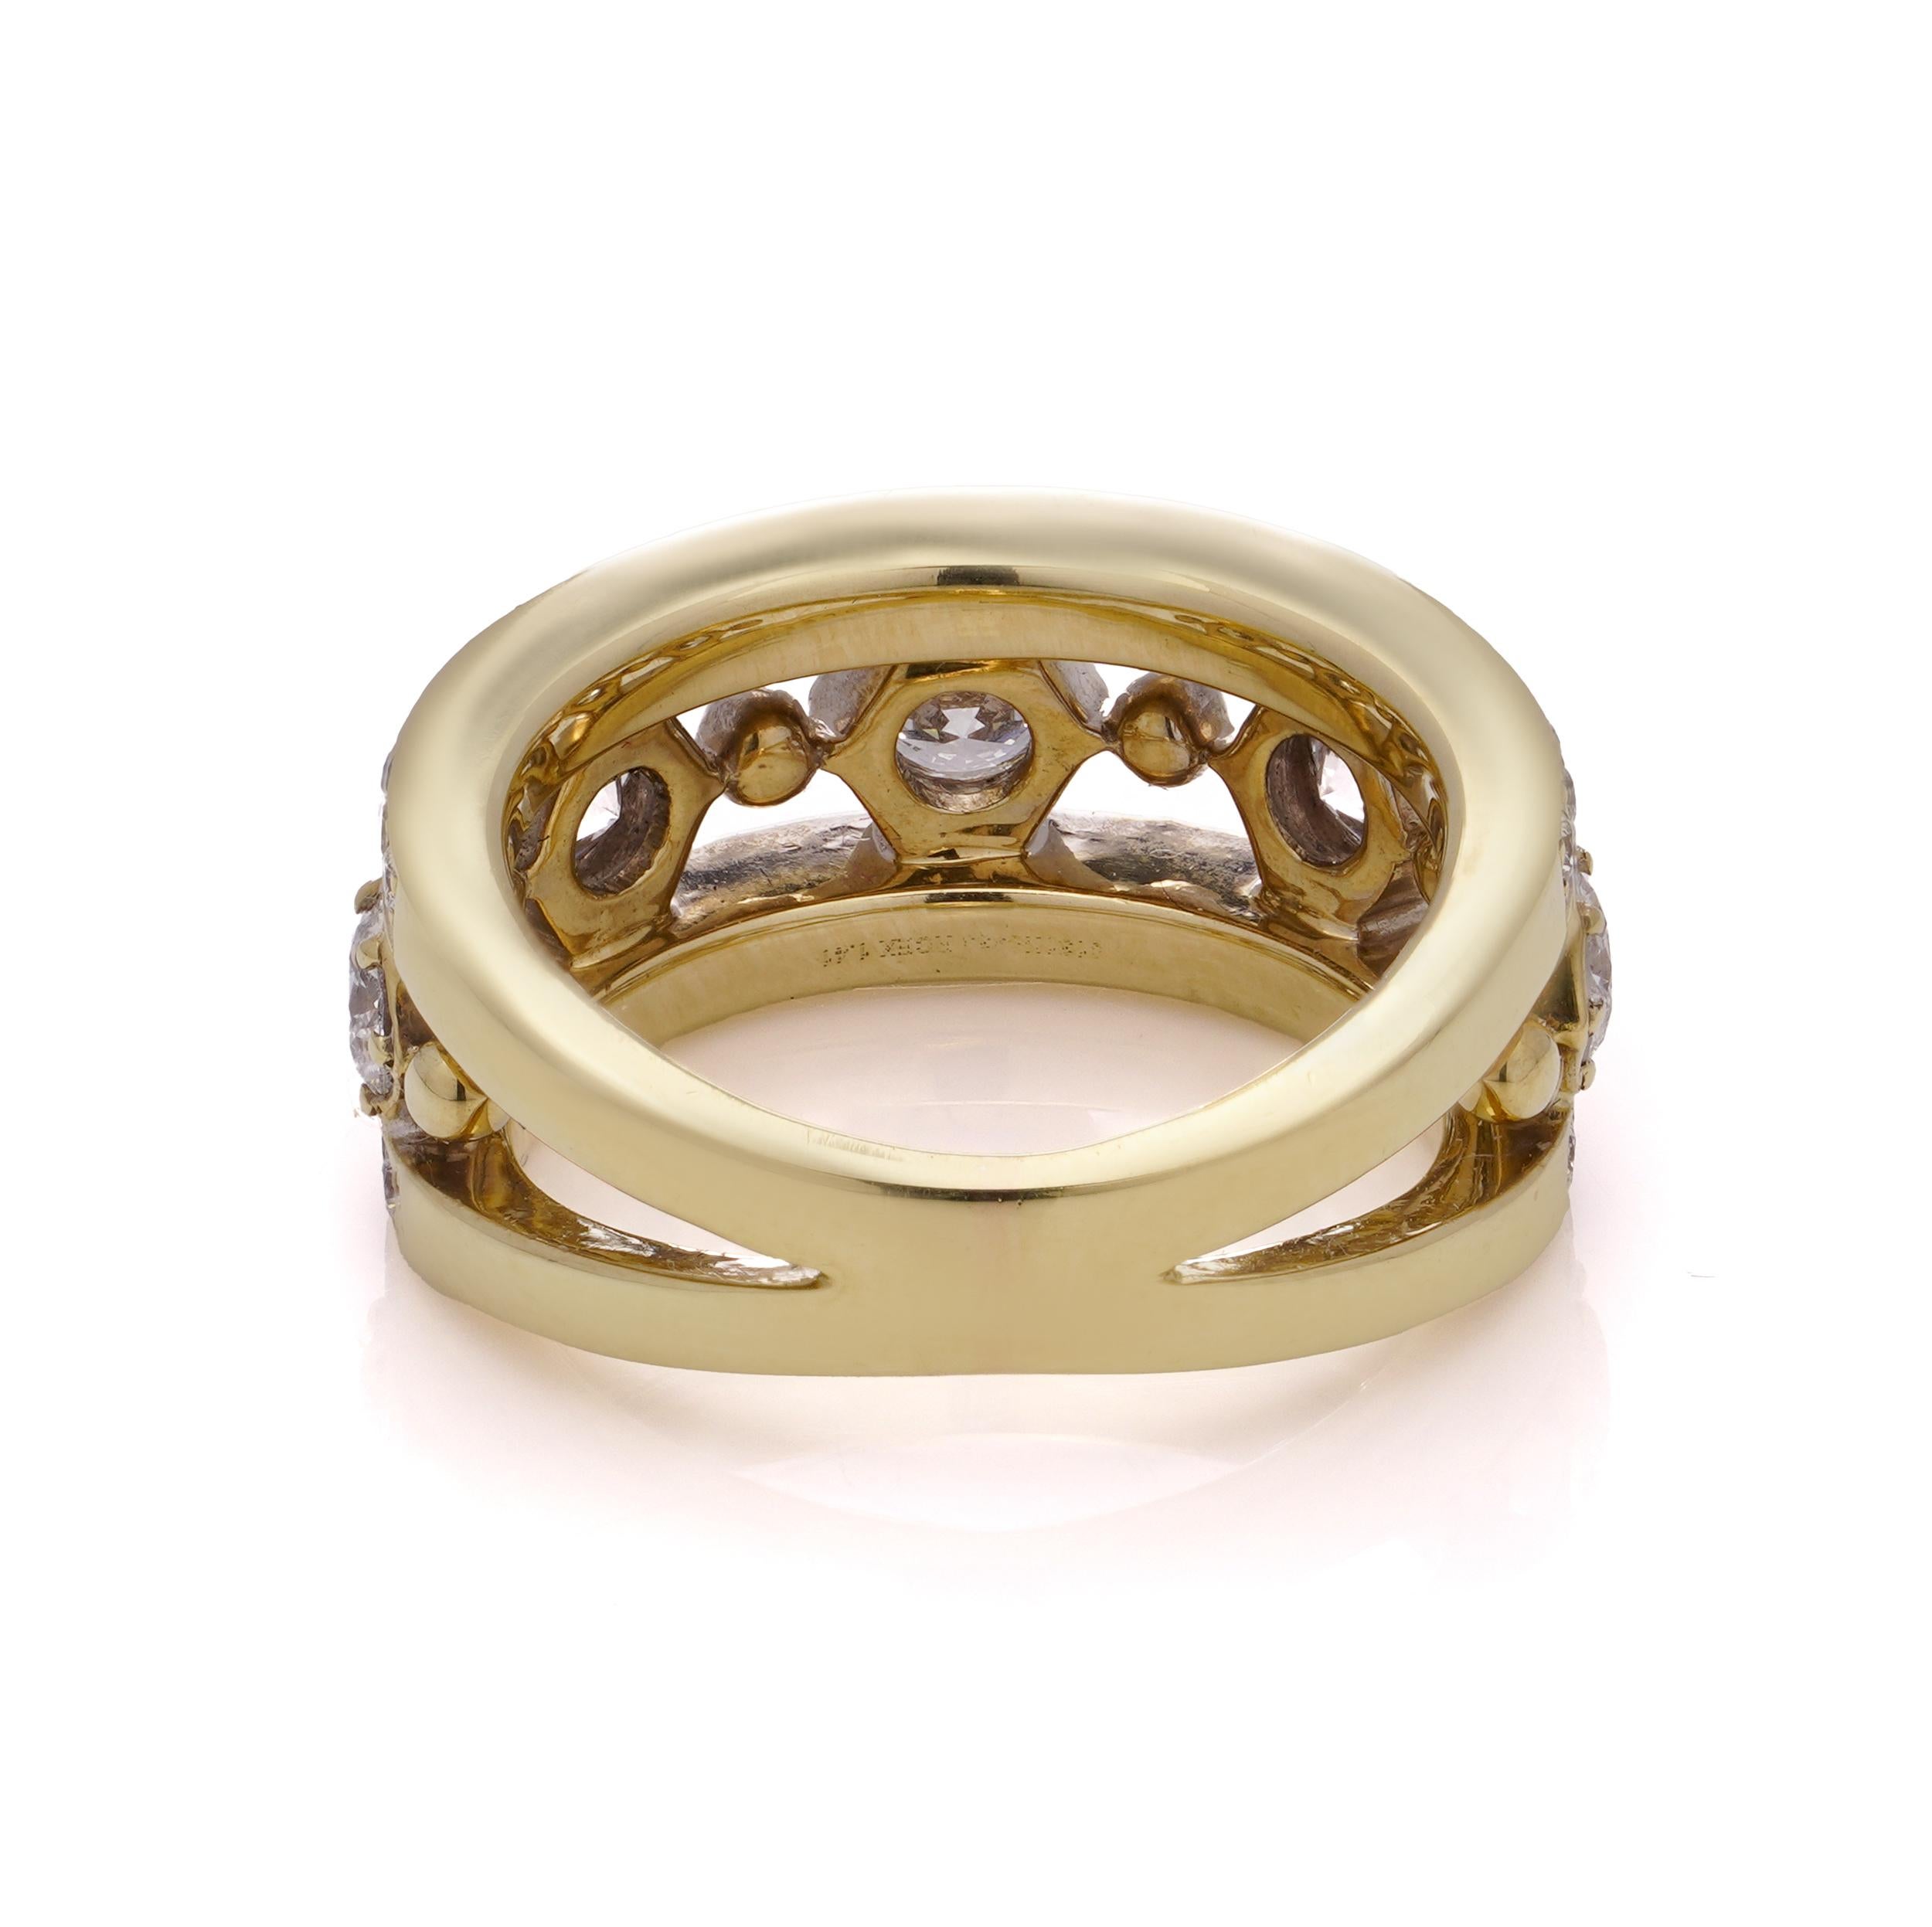 Boodles & Dunthorne 18kt. yellow gold band ring set with 1.46 carats of round brilliant-cut diamonds.
Designer: Boodles & Dunthorne
Fully hallmarked.
Made in England, Circa 2014

Diamonds -
Quantity of stones: 51
Carat weight:46 x 0.01 carats
2 x